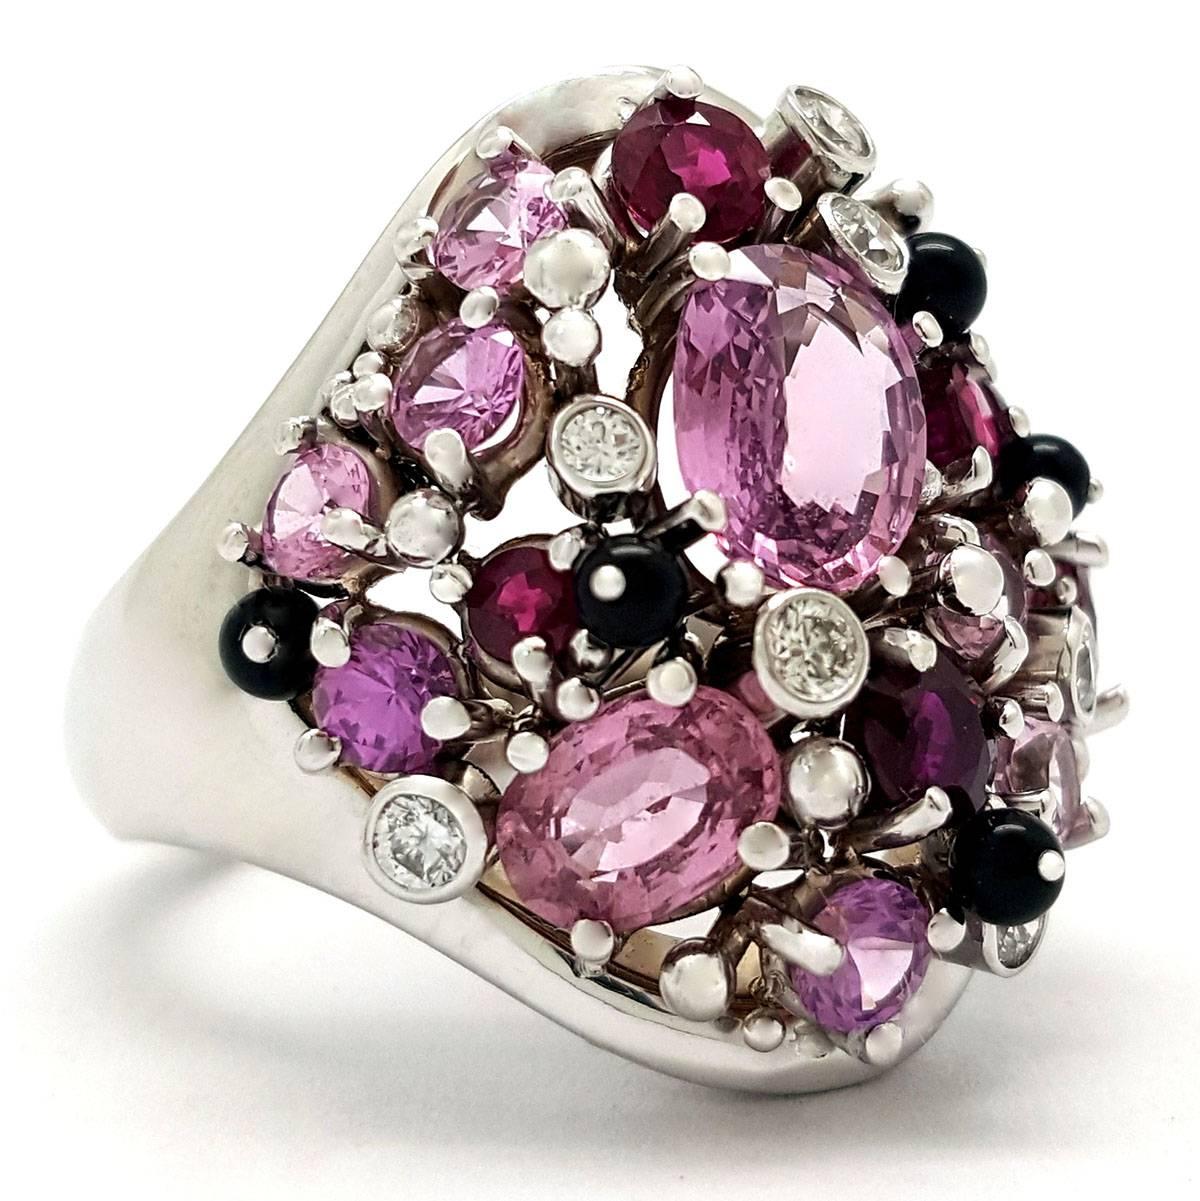 This chic cocktail ring features brilliant gemstones set into 14k white gold. The gemstones include pink sapphire, ruby, diamond and black onyx—a real gemstone party! The pink sapphires weigh 3.68 carats and the rubies have an additional weight of